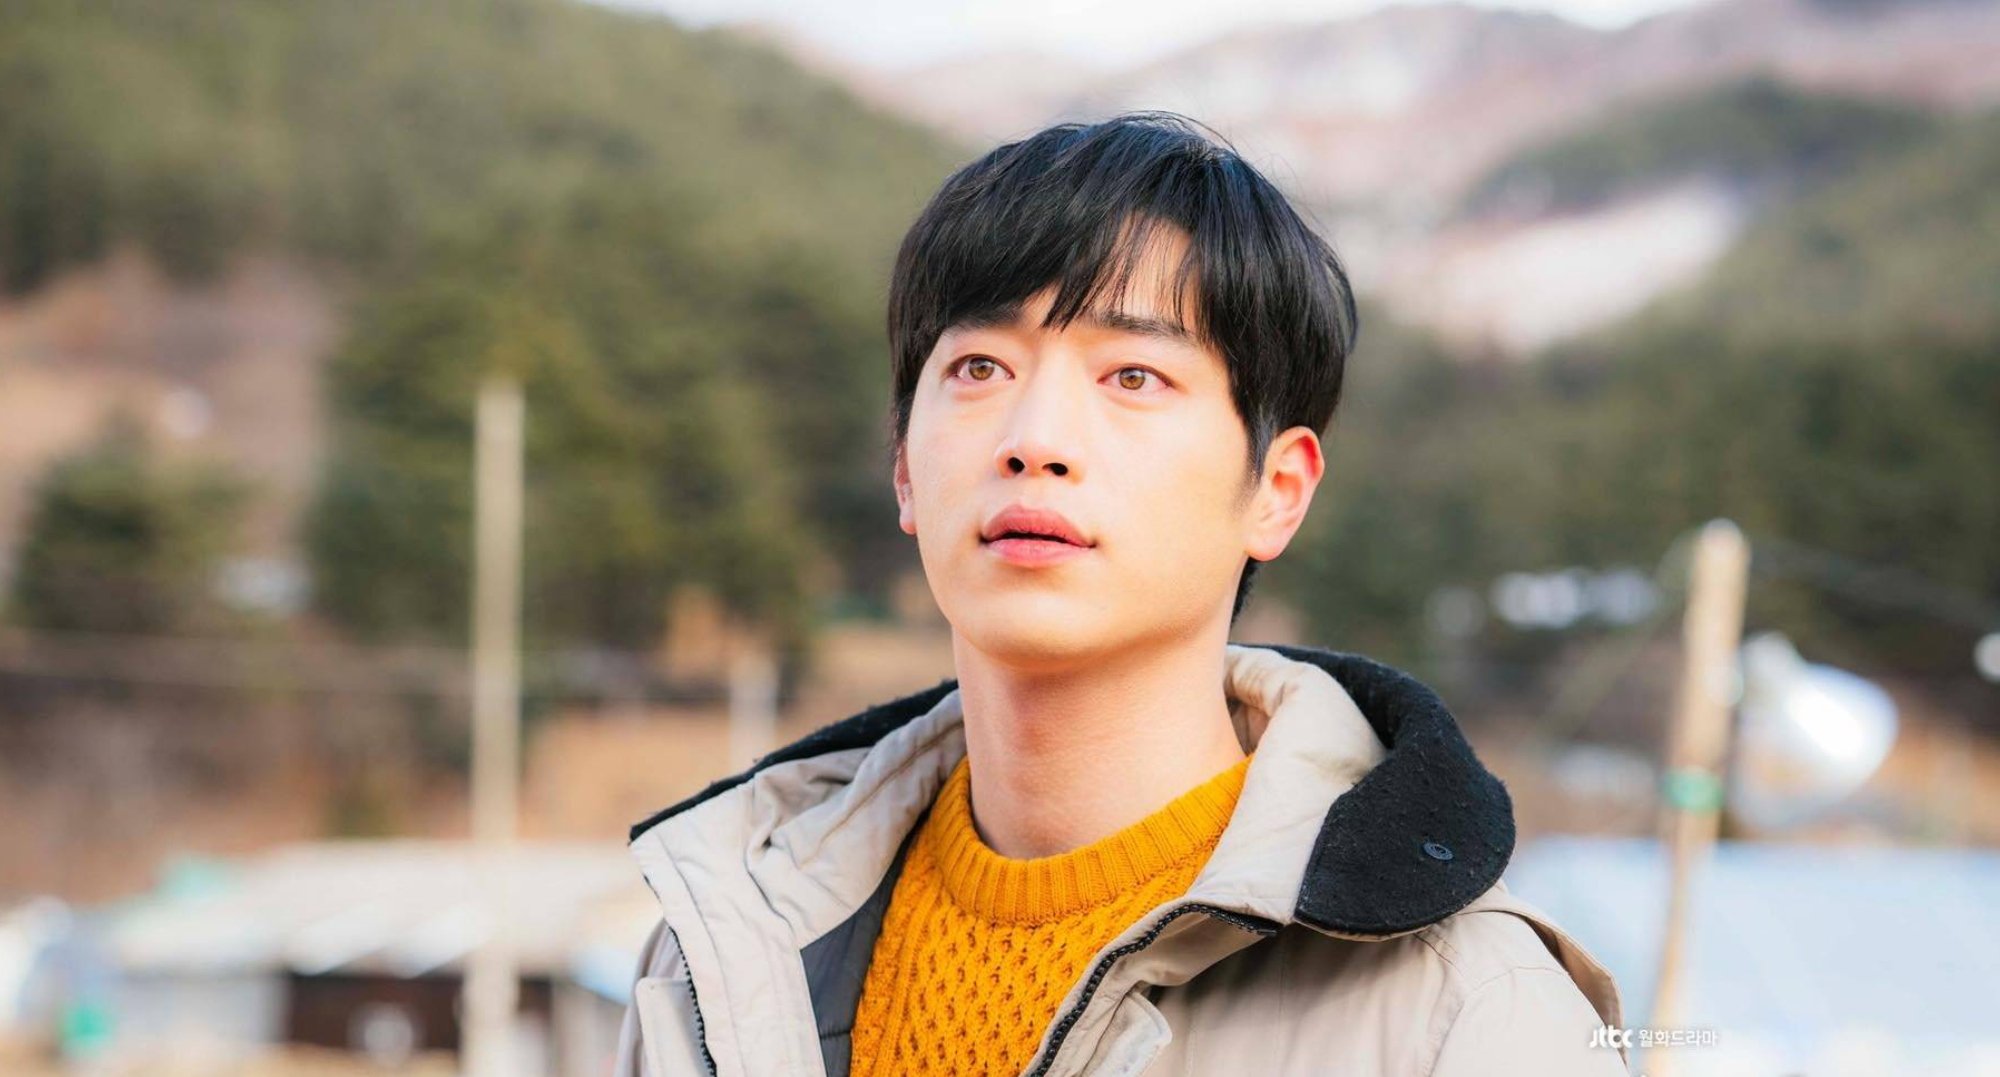 Actor Seo Kang-joon in small town K-drama 'When the Weather is Fine.'